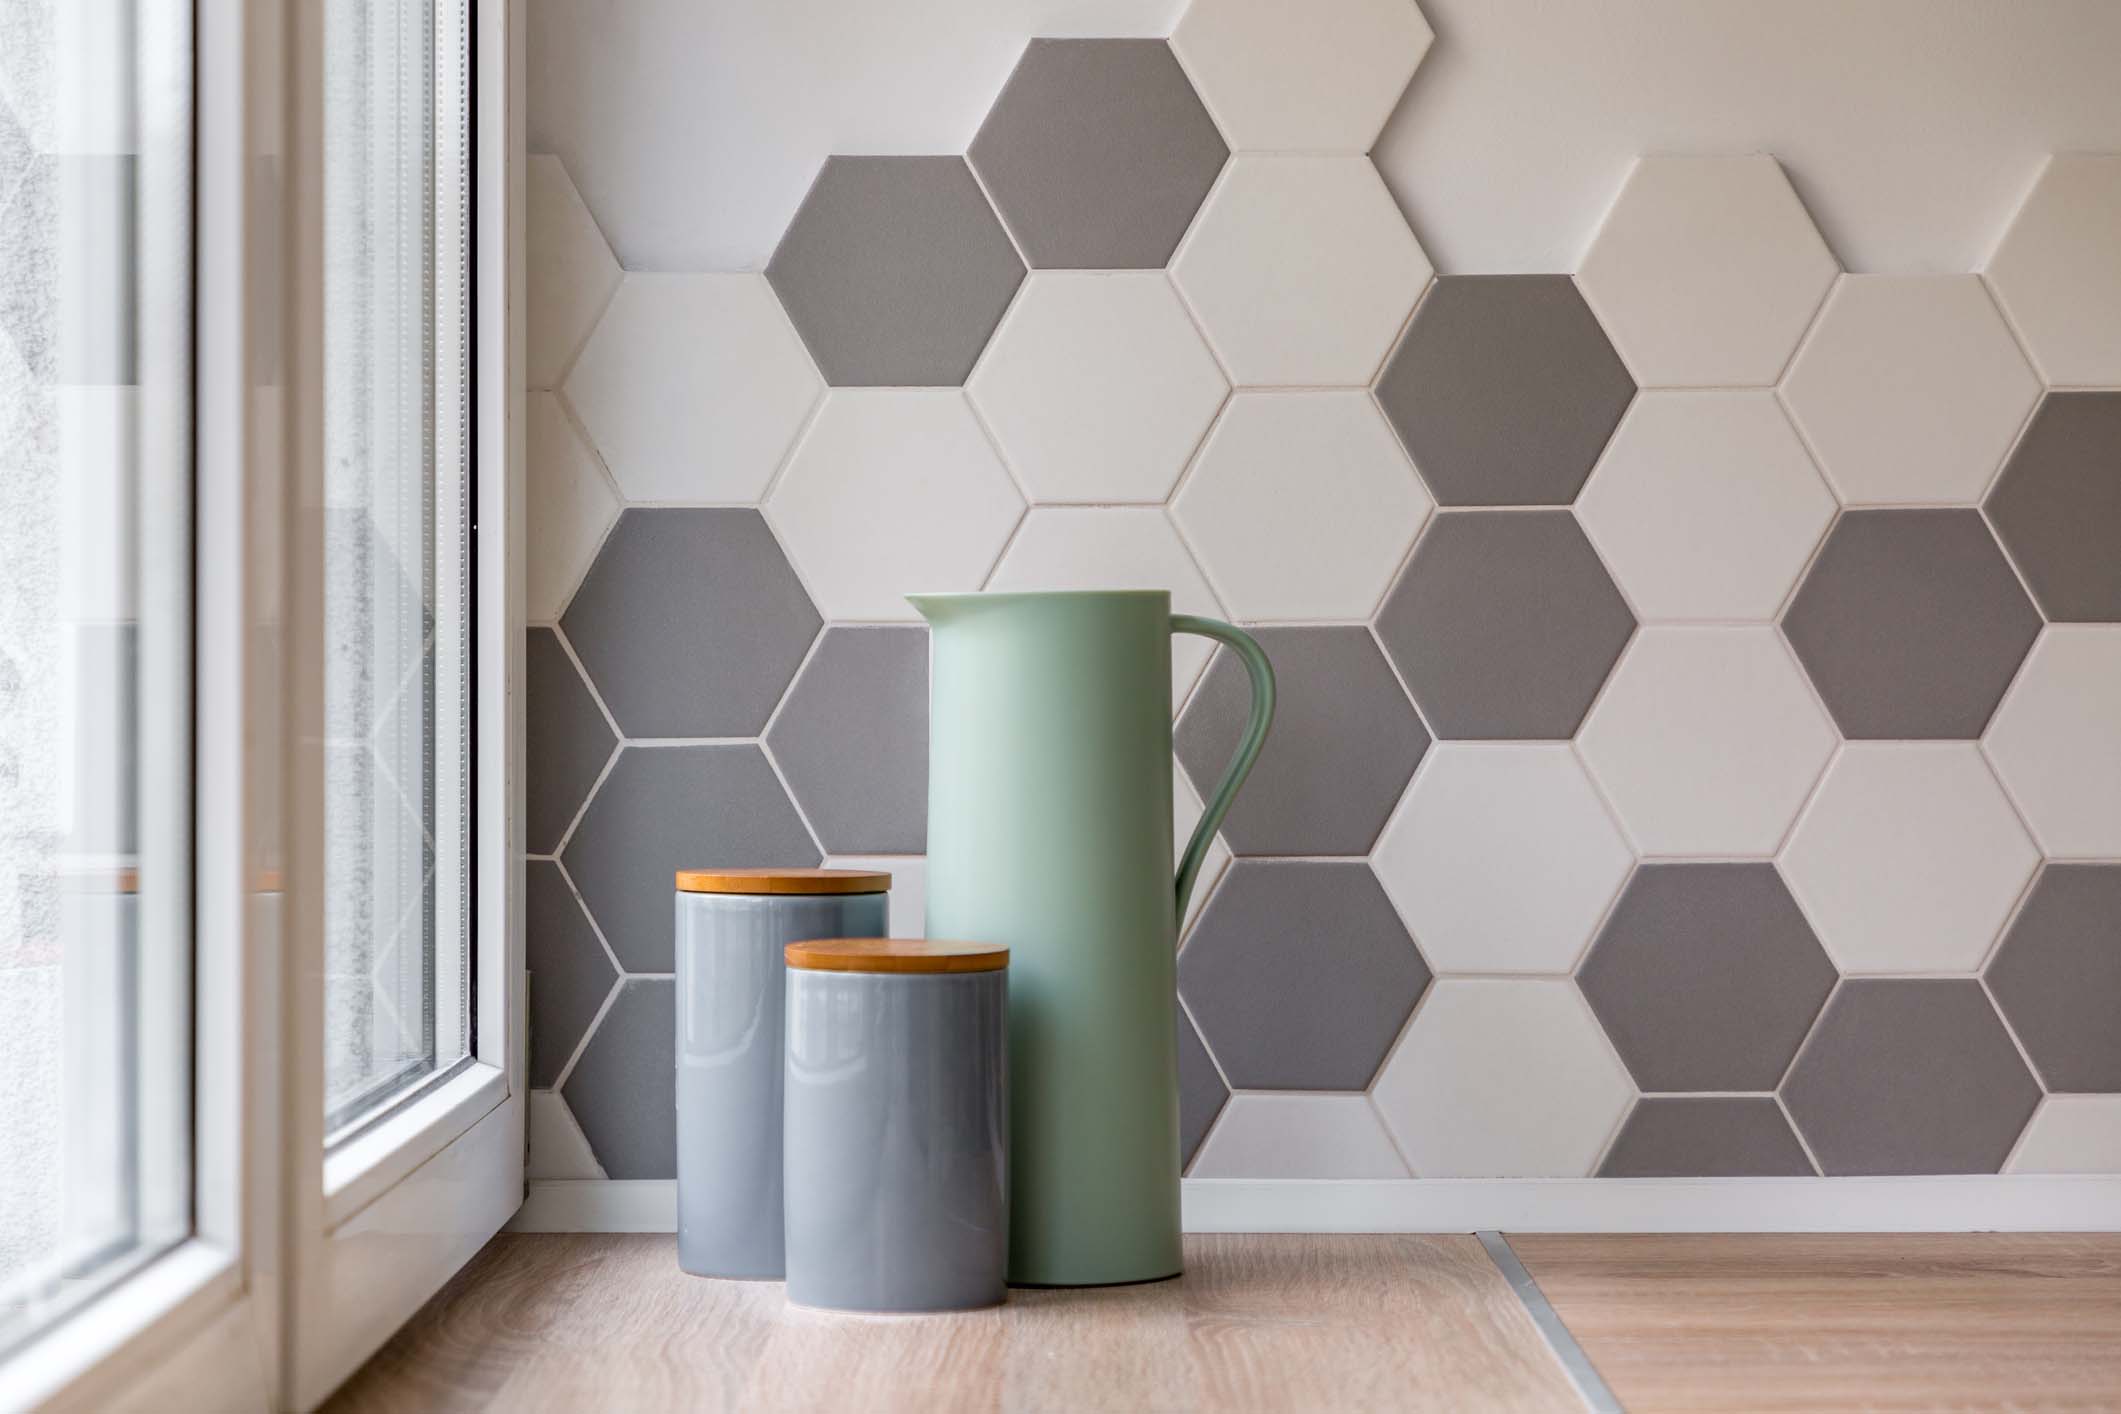 Staggered hexagon tile backsplash in white and gray